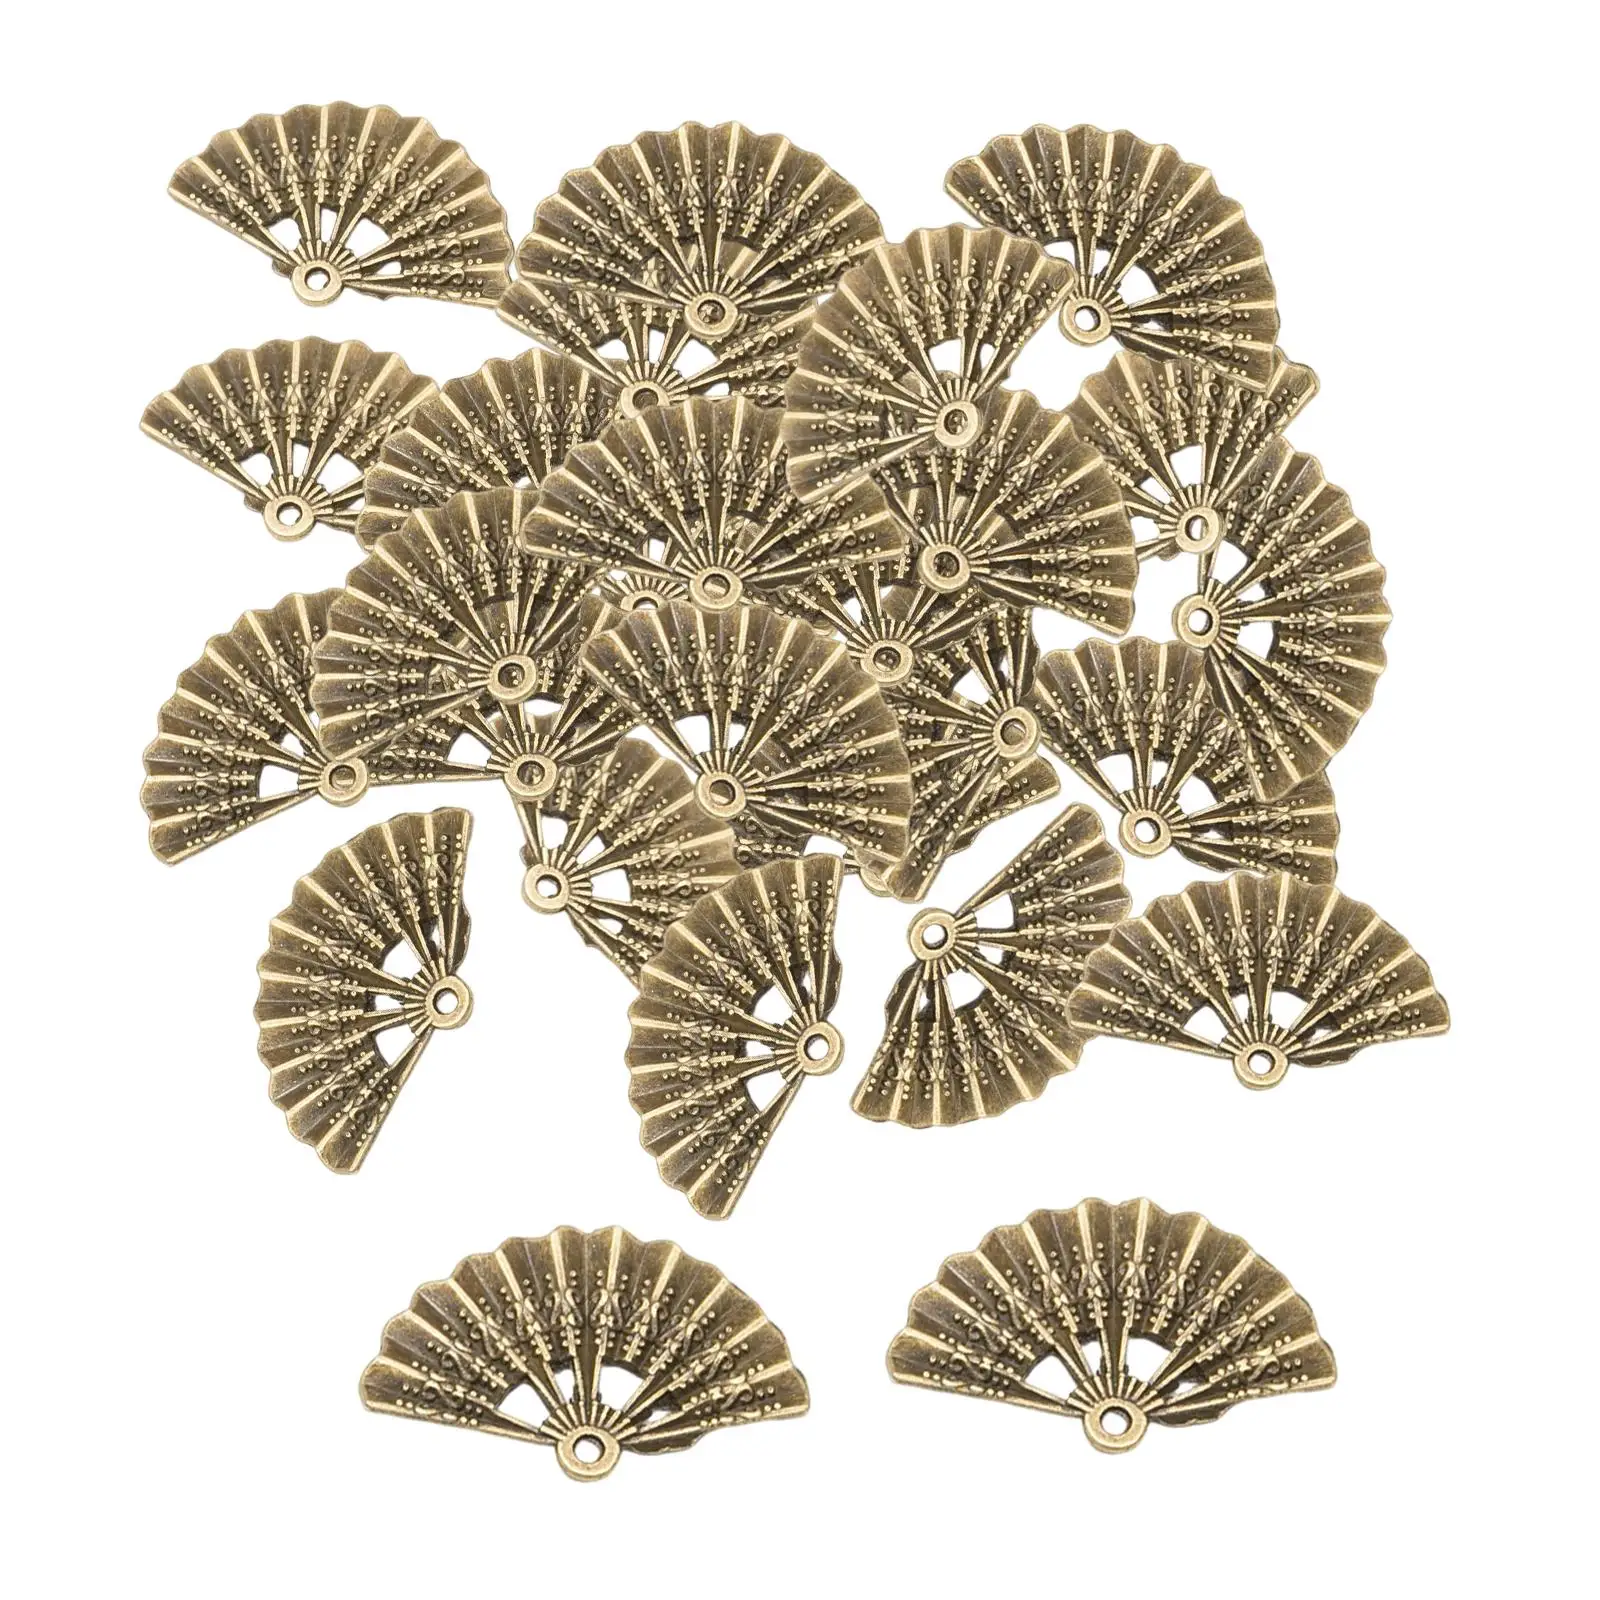 50 Pieces Vintage Fan Shaped Charms Semicircular Pendents for Earrings Necklace Hairpin DIY Crafts Jewelry Making